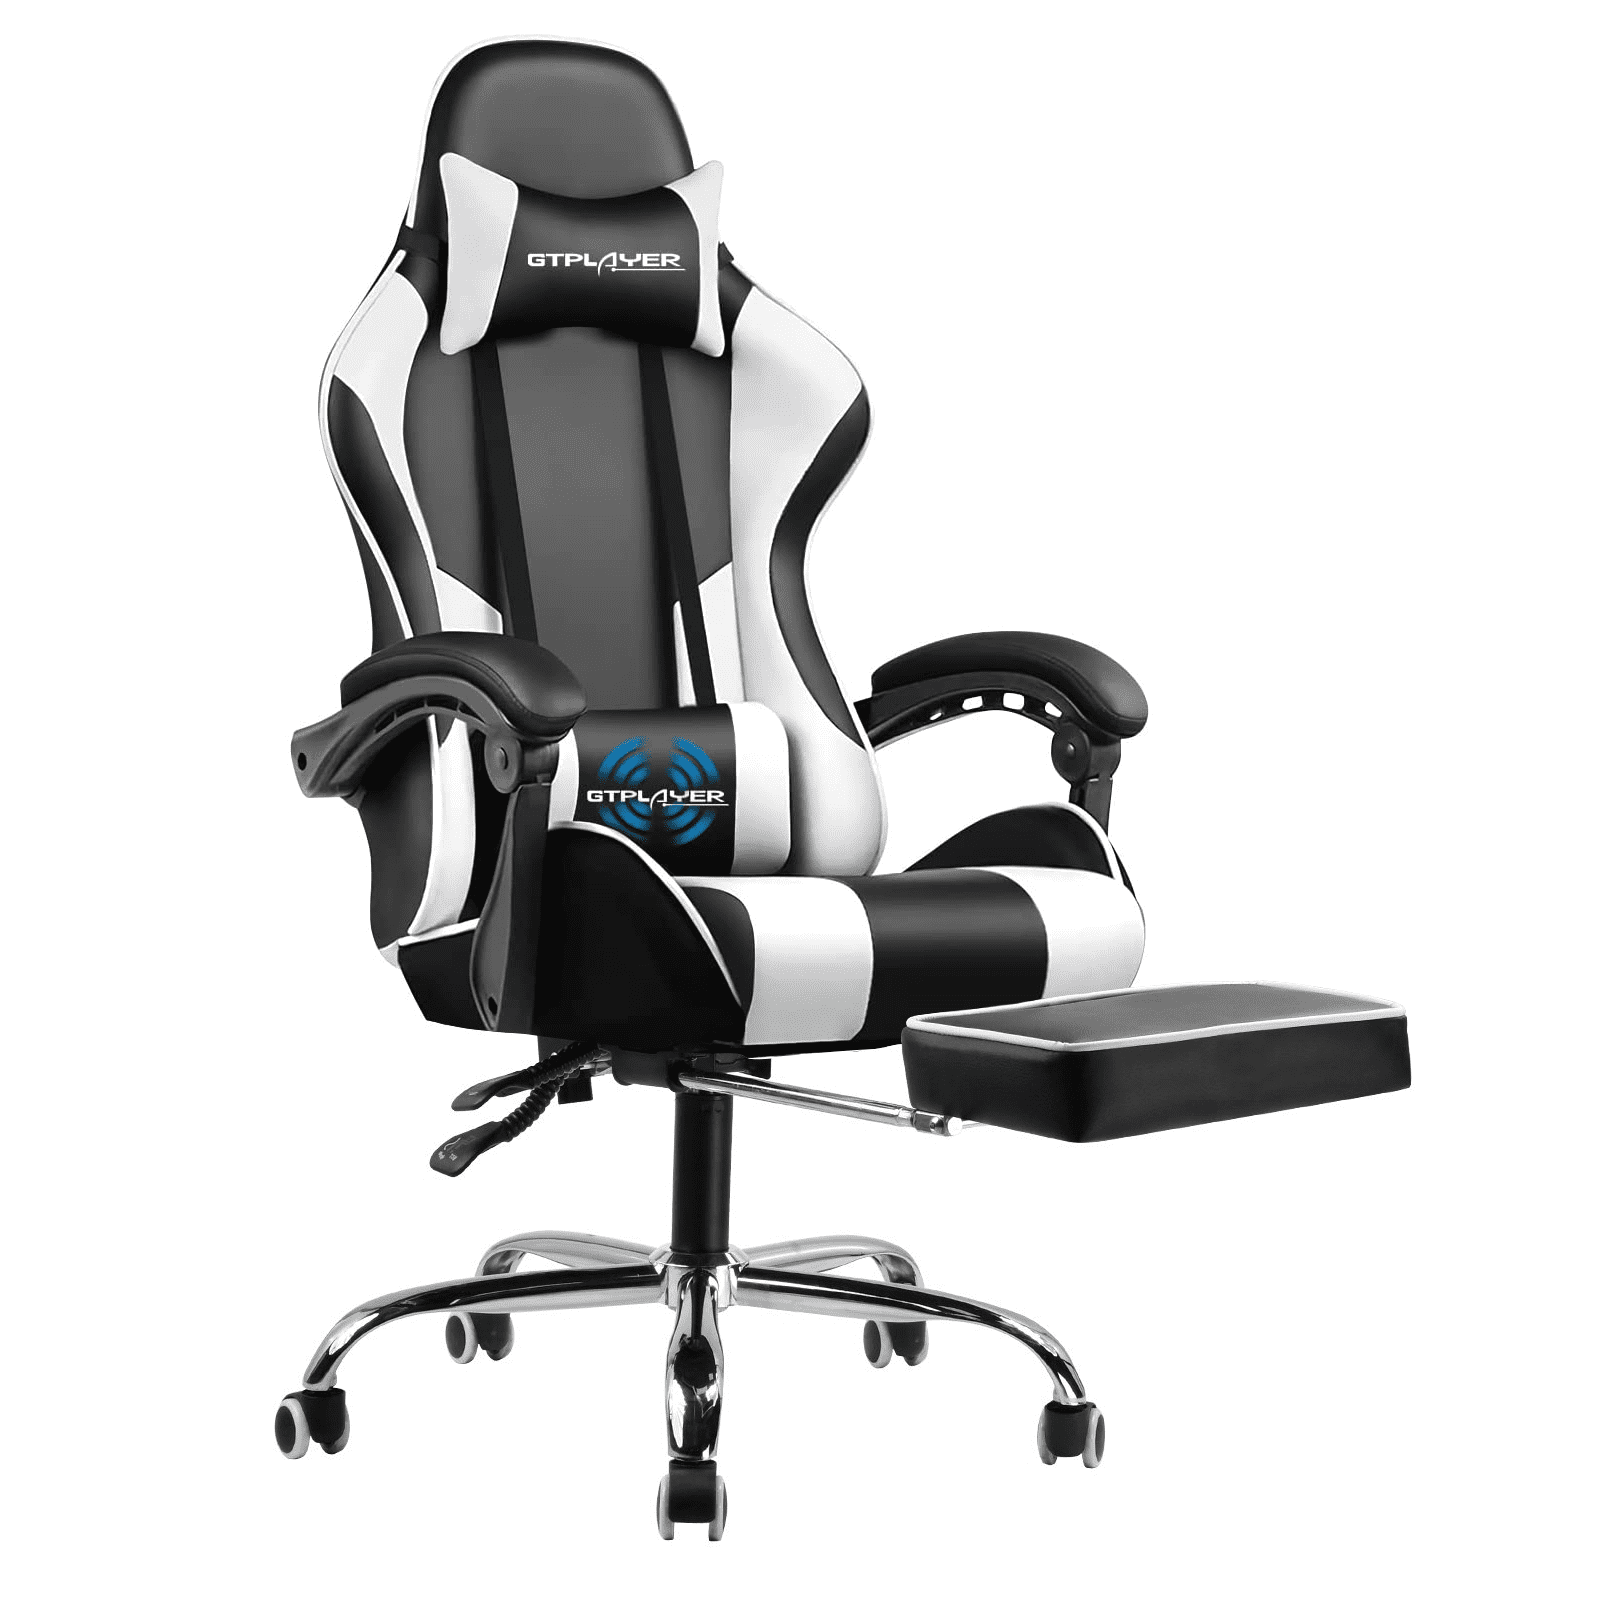 Red GTPLAYER Gaming Chair with Footrest Ergonomic Massage Office Chair for Adults Adjustable Swivel Leather Computer Chair High Back Desk Chair with Headrest and Massager Lumbar Support 